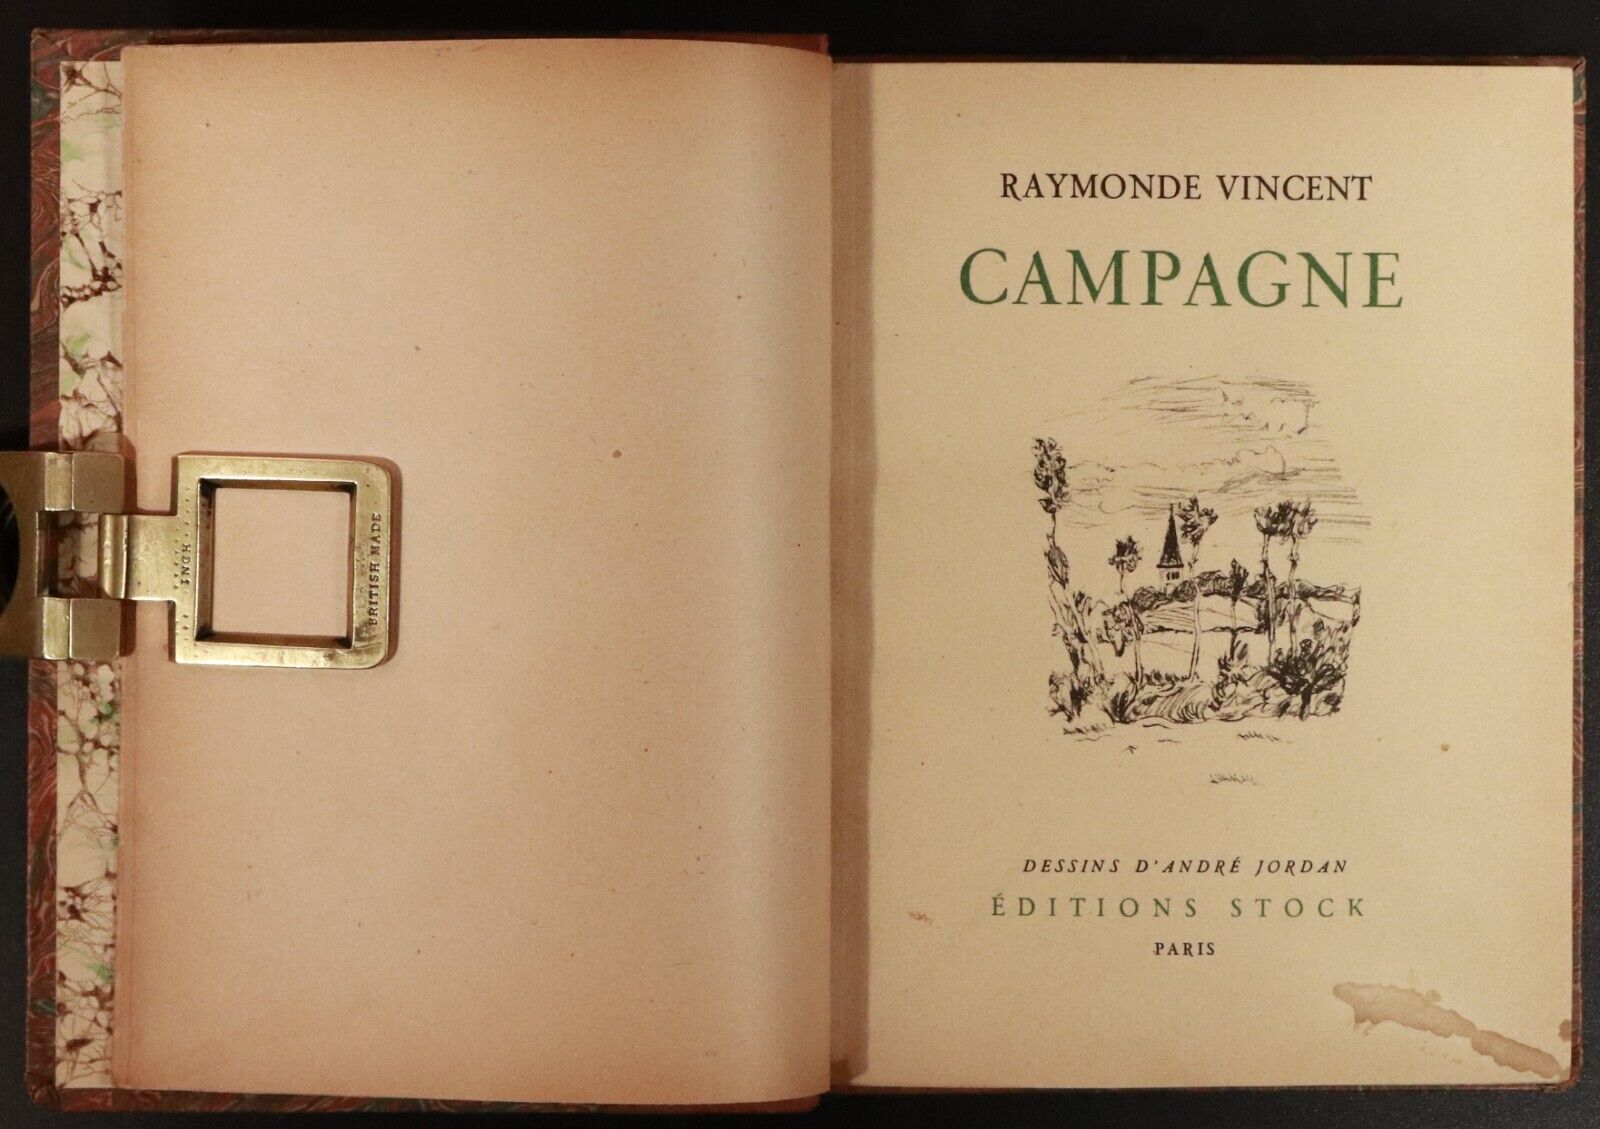 1944 Campagne by Raymonde Vincent Ltd Edition French Fiction Book Fine Binding